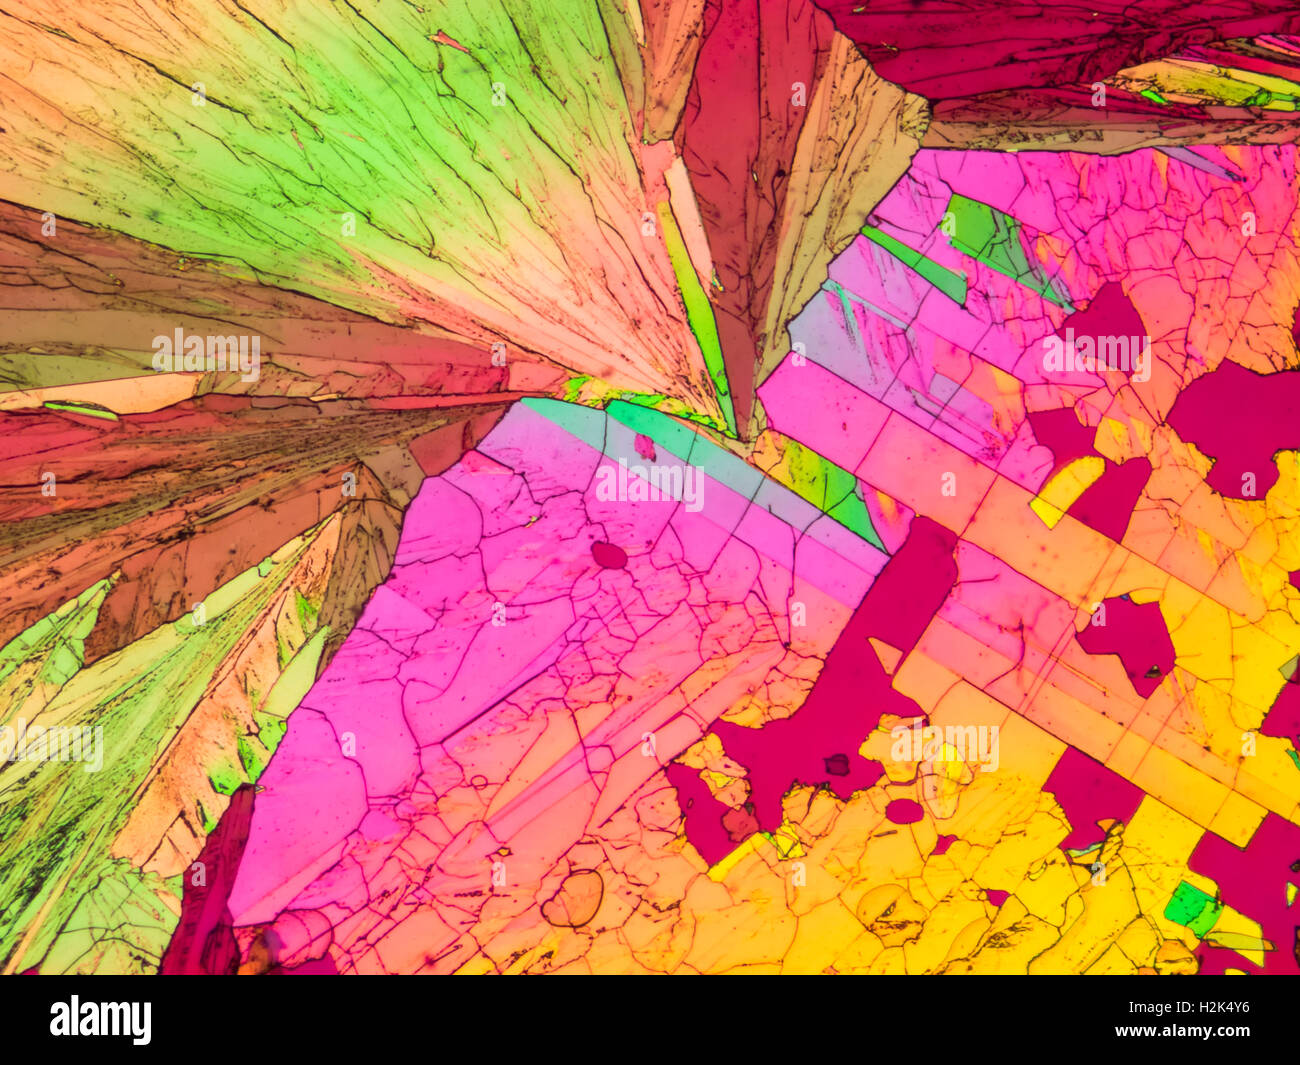 Microscopic image of  Sulfur crystals in polarized light. Stock Photo